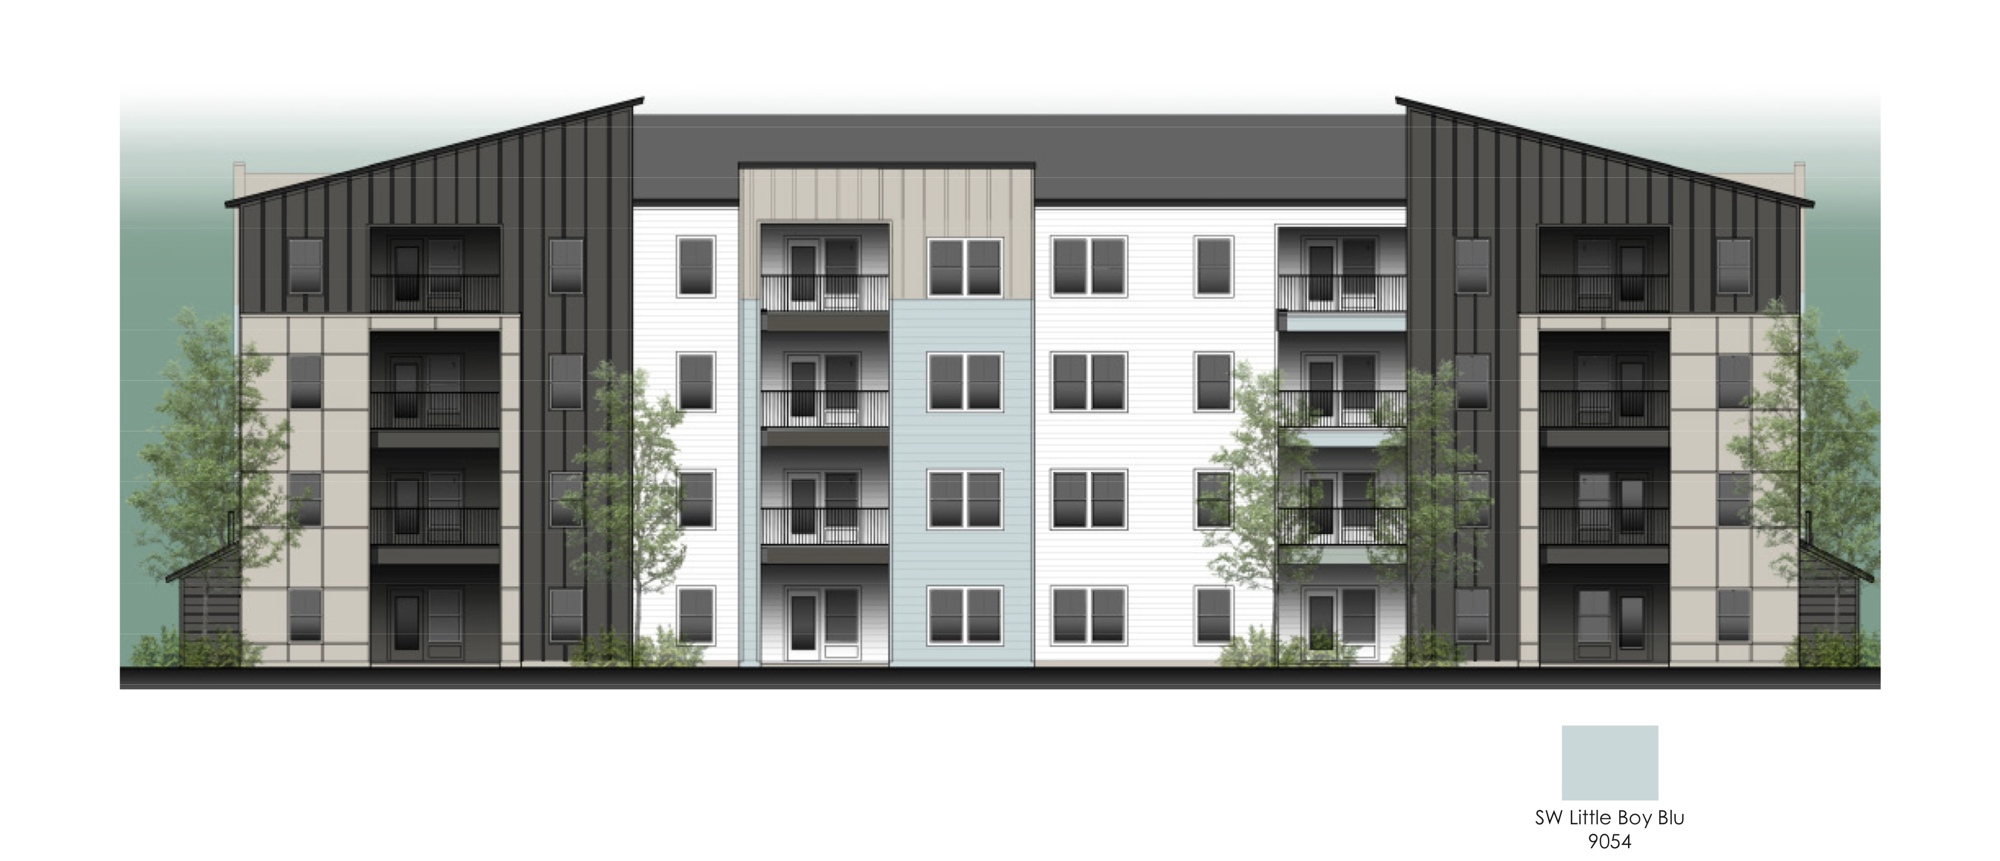 The Two multifamily properties are planned at Grand Cypress, both four stories.